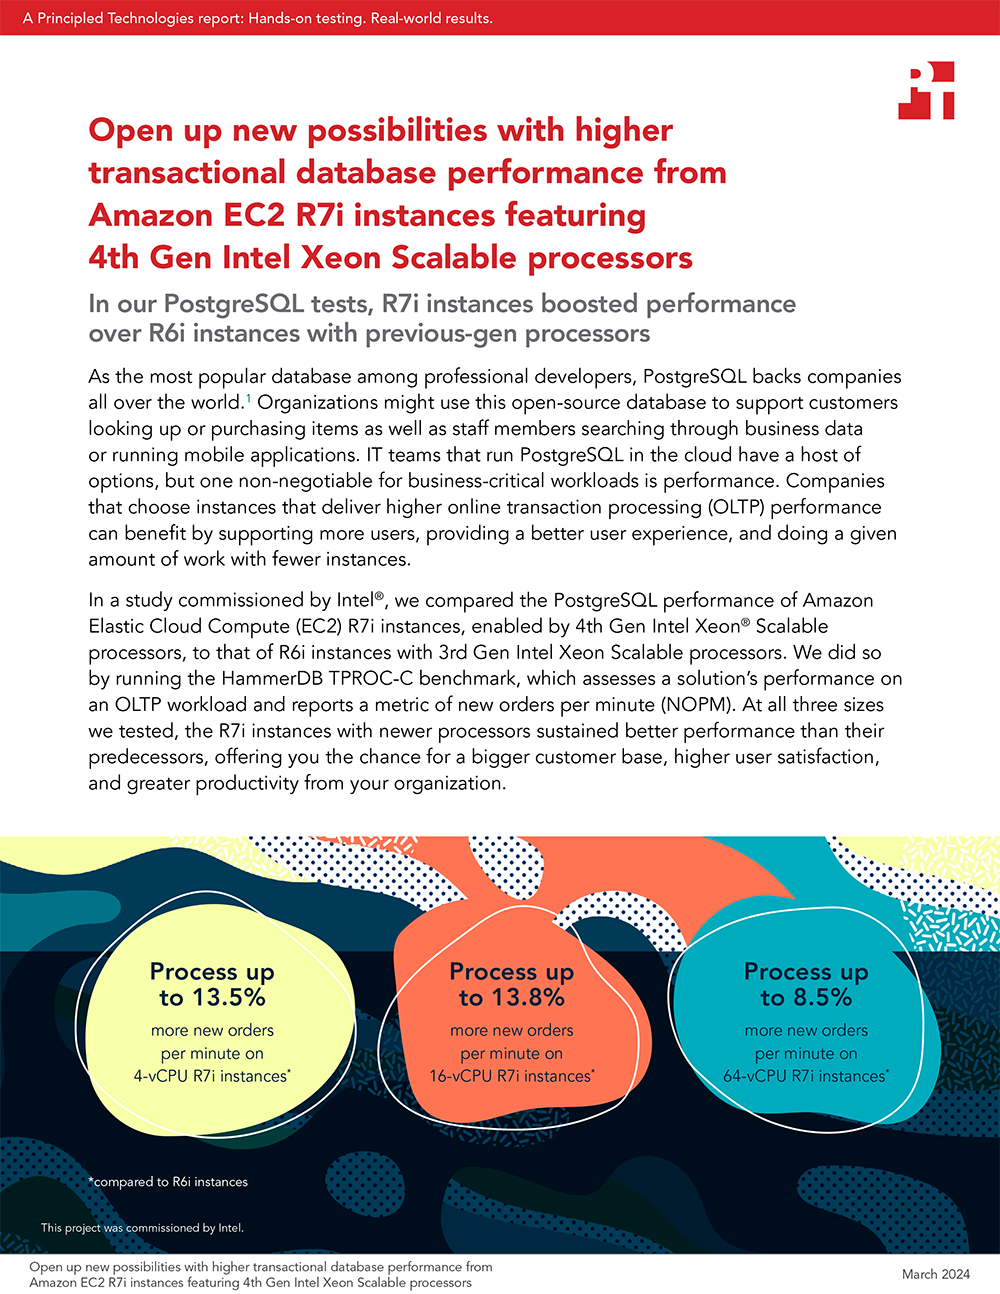 PT Study Found Amazon EC2 R7i Instances with 4th Gen Intel Xeon Scalable Processors Delivered Better Transactional Database Performance Than R6i Instances